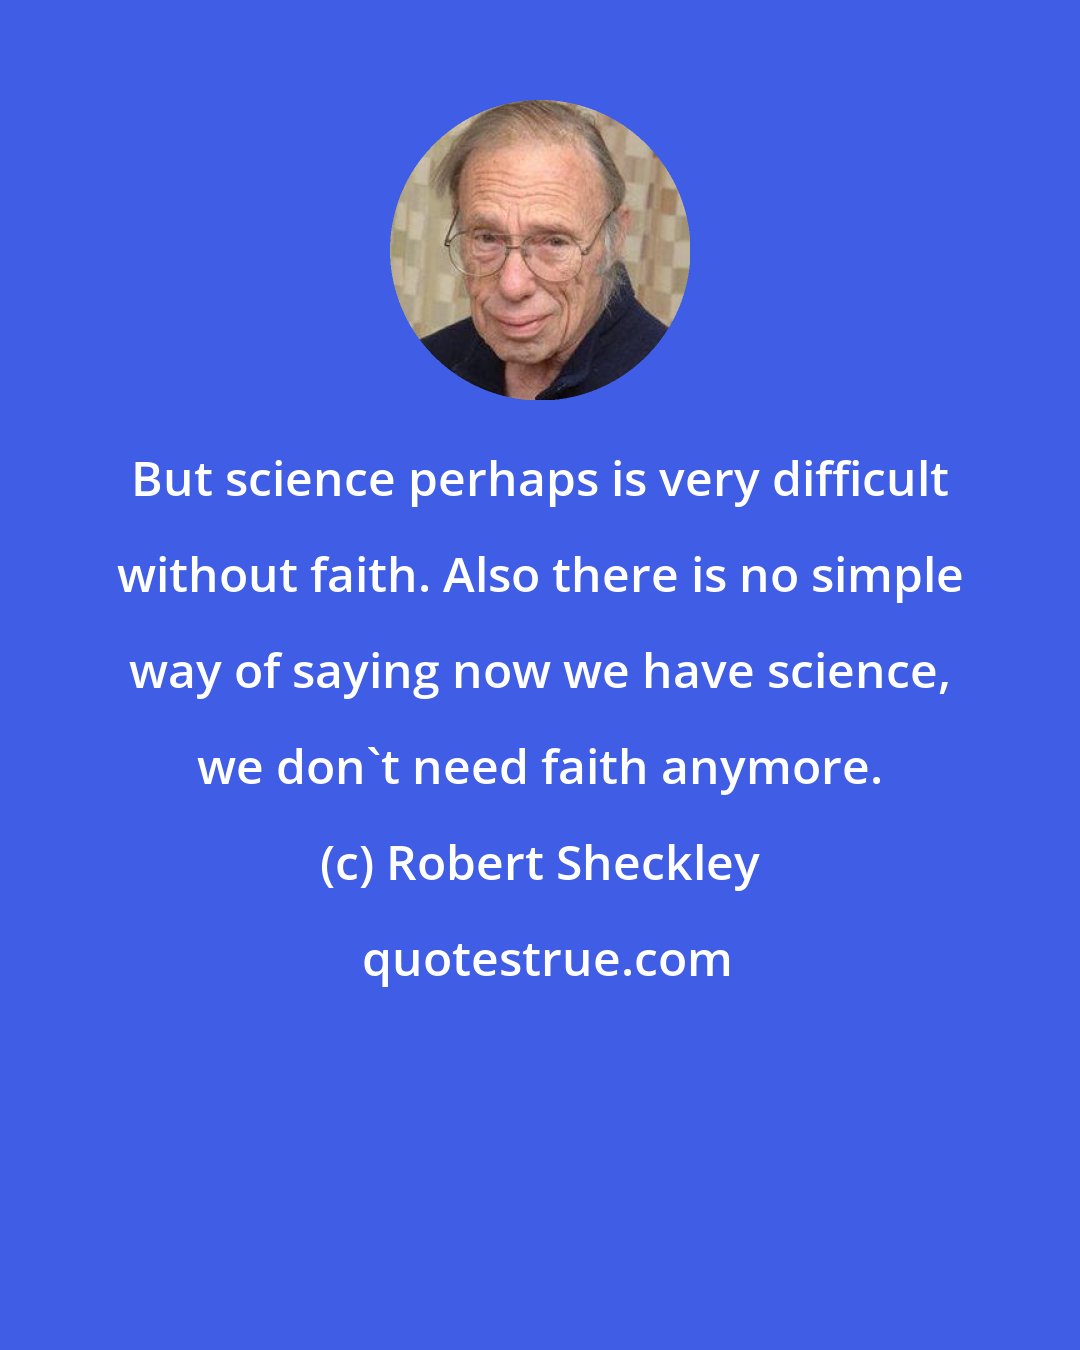 Robert Sheckley: But science perhaps is very difficult without faith. Also there is no simple way of saying now we have science, we don't need faith anymore.